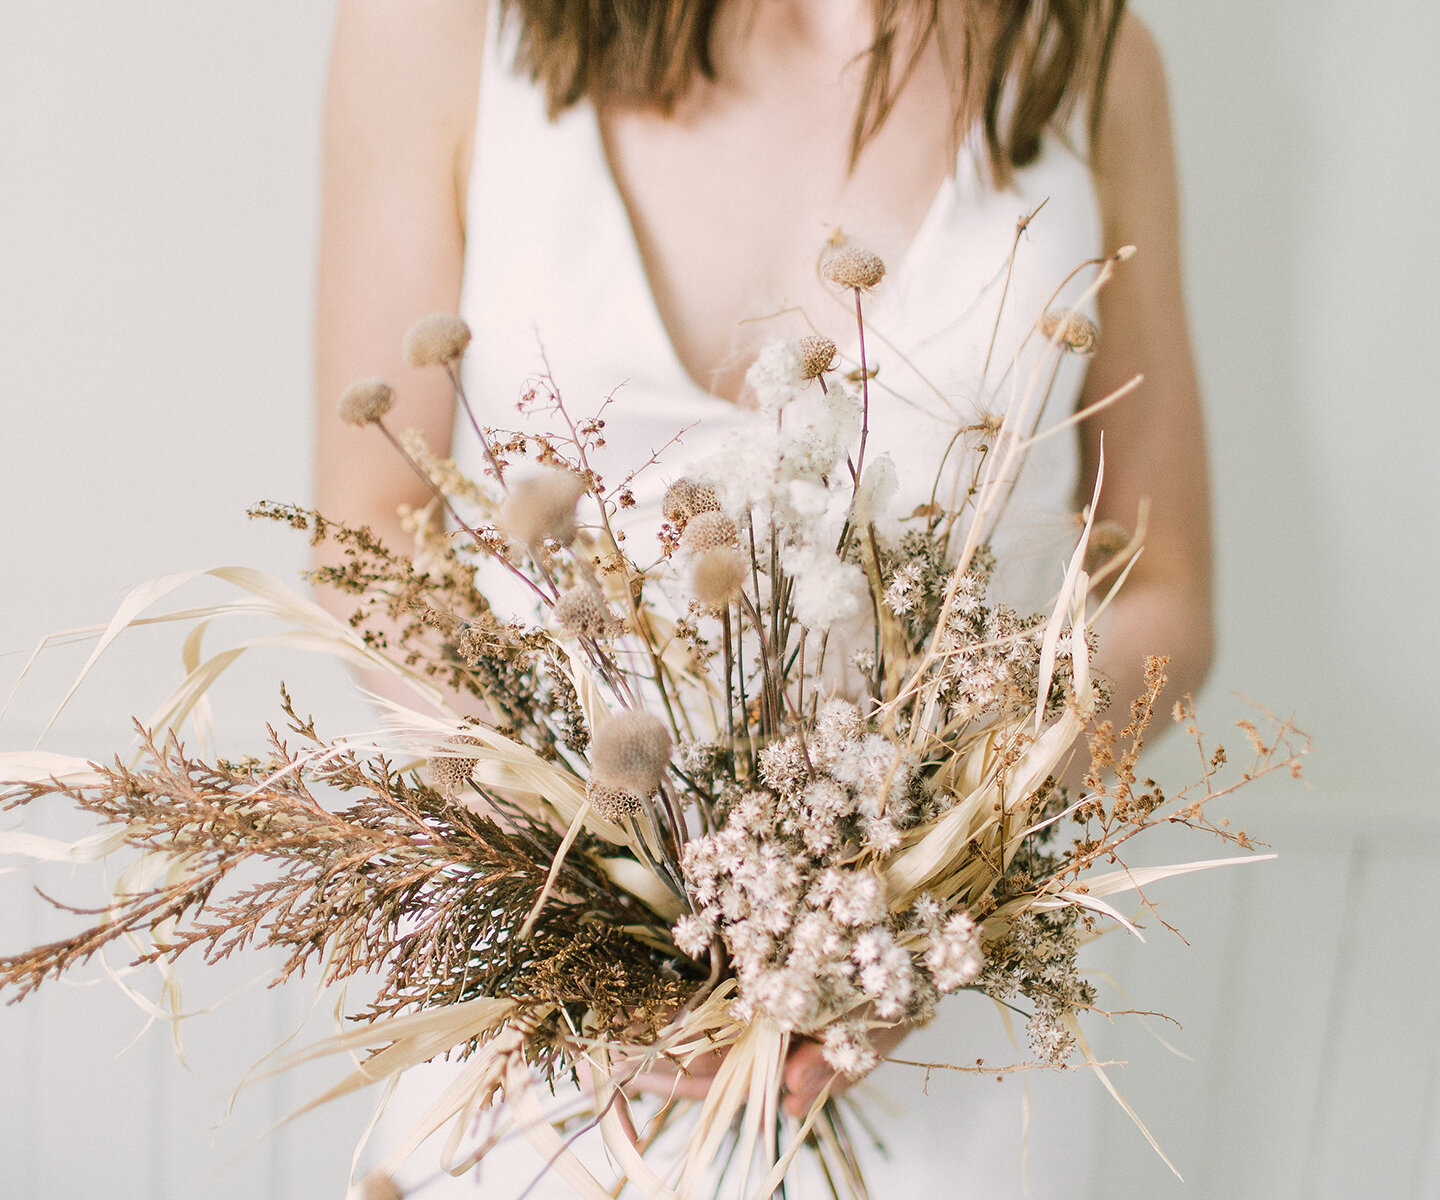 Bridal Bouquet Inspiration for Fall: 15 of the Prettiest Bouquets We've Seen This Autumn in Alberta and the Rockies